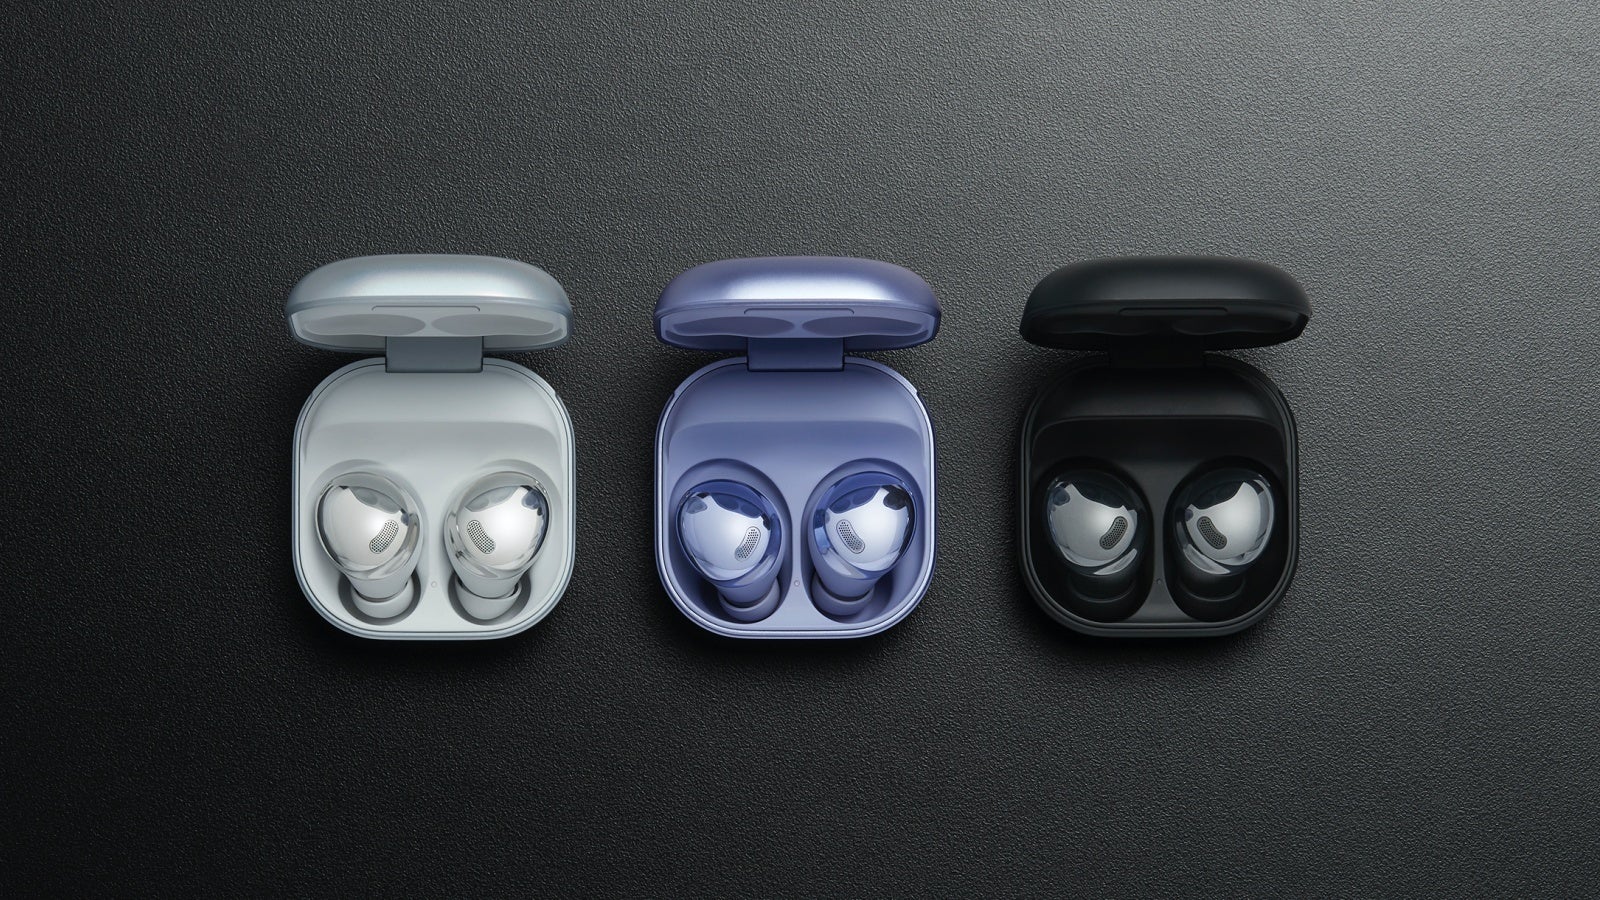 Galaxy Buds Pro colors - Samsung&#039;s next big AirPods rivals will reportedly come in these snazzy colors